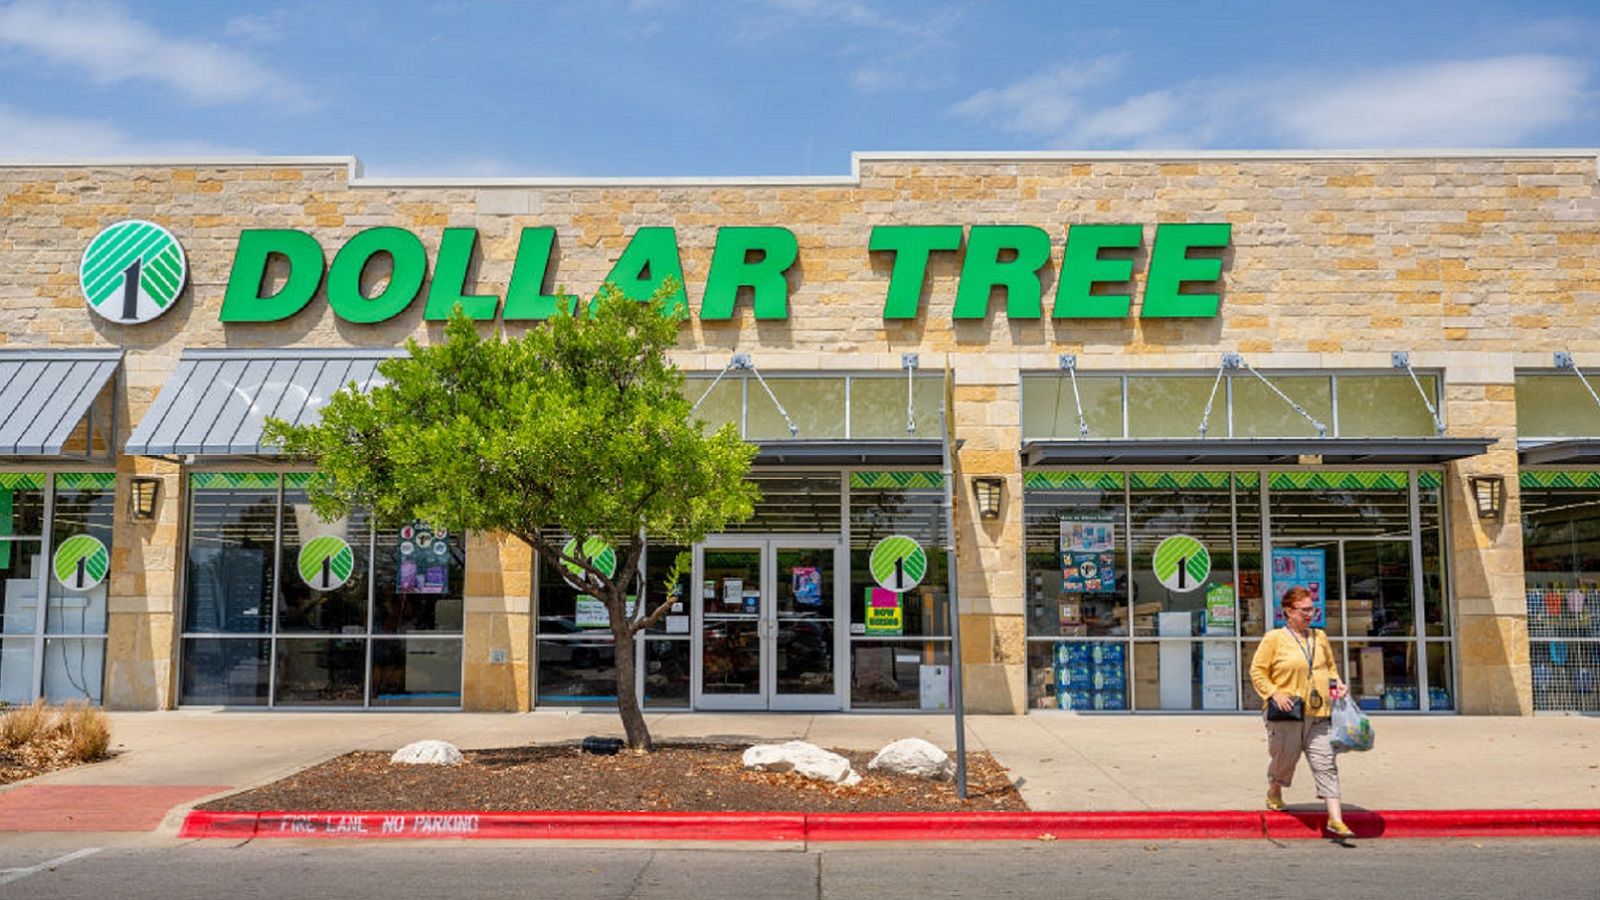 dollar tree raises max price to $7: which items will cost more?